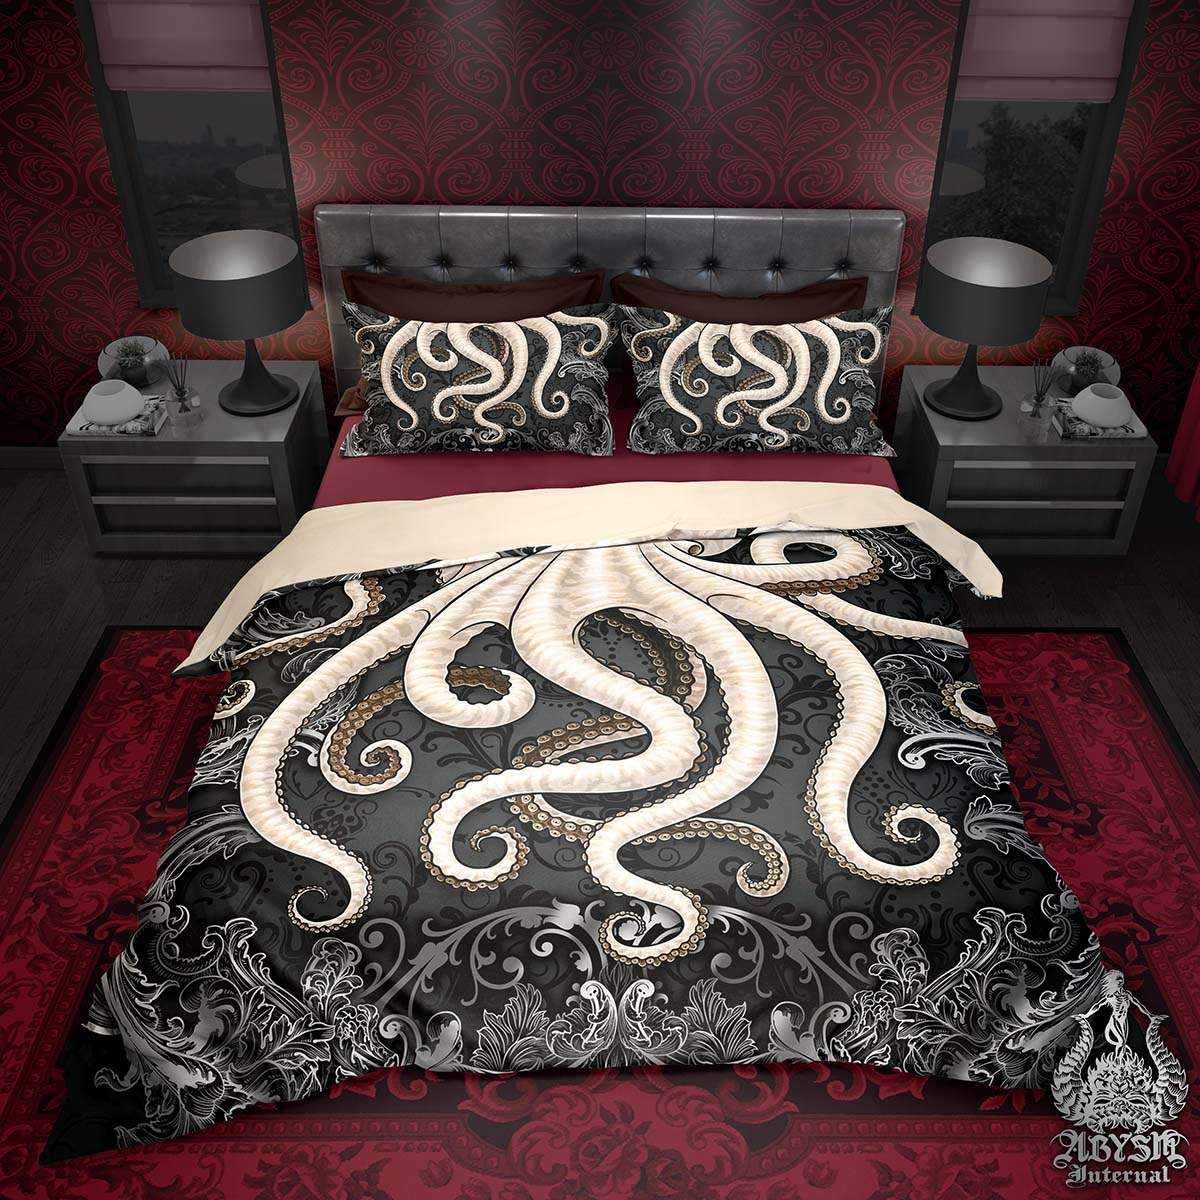 Gothic Bedding Sets - Art Prints, Decor and Gifts, Octopus Comforters and Duvet Covers - Abysm Internal